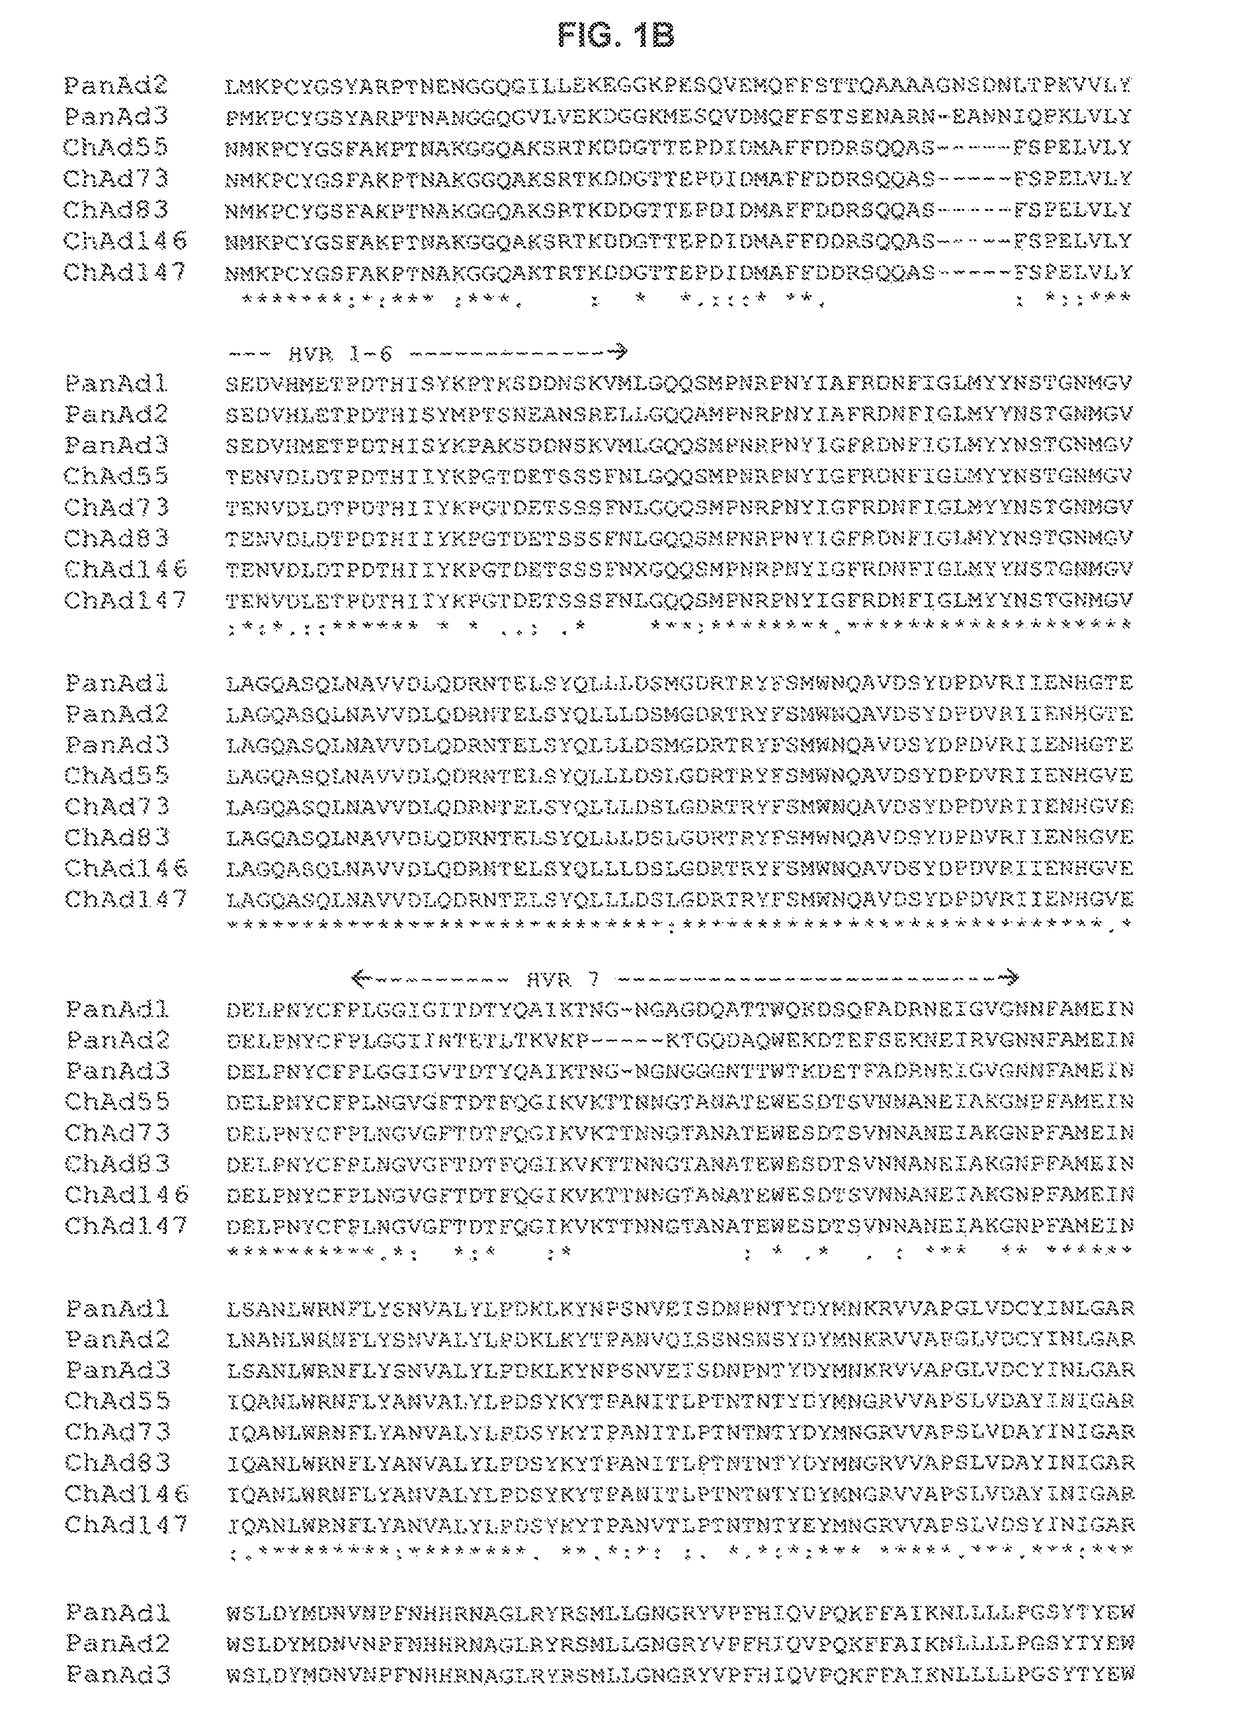 Simian adenovirus nucleic acid- and amino acid-sequences, vectors containing same, and uses thereof